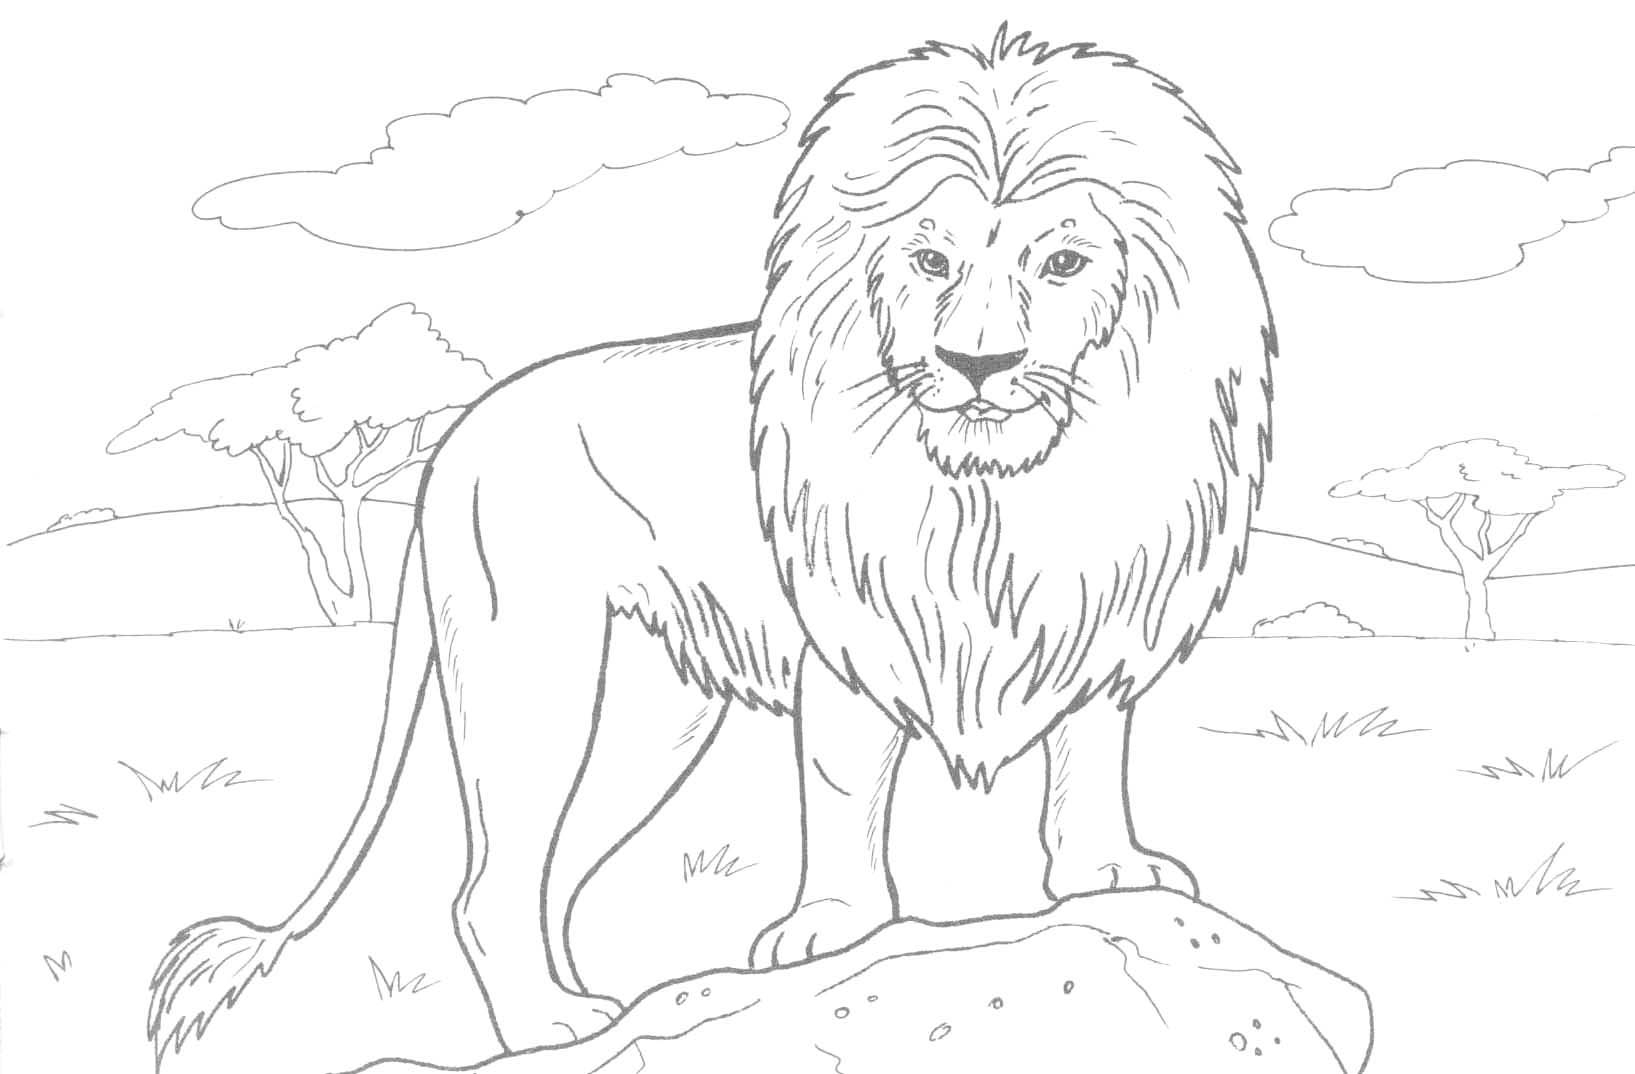 Voltron Coloring Pages Free Exclusive Idea Coloring Pages Lions Free Printable Lion For Kids Of